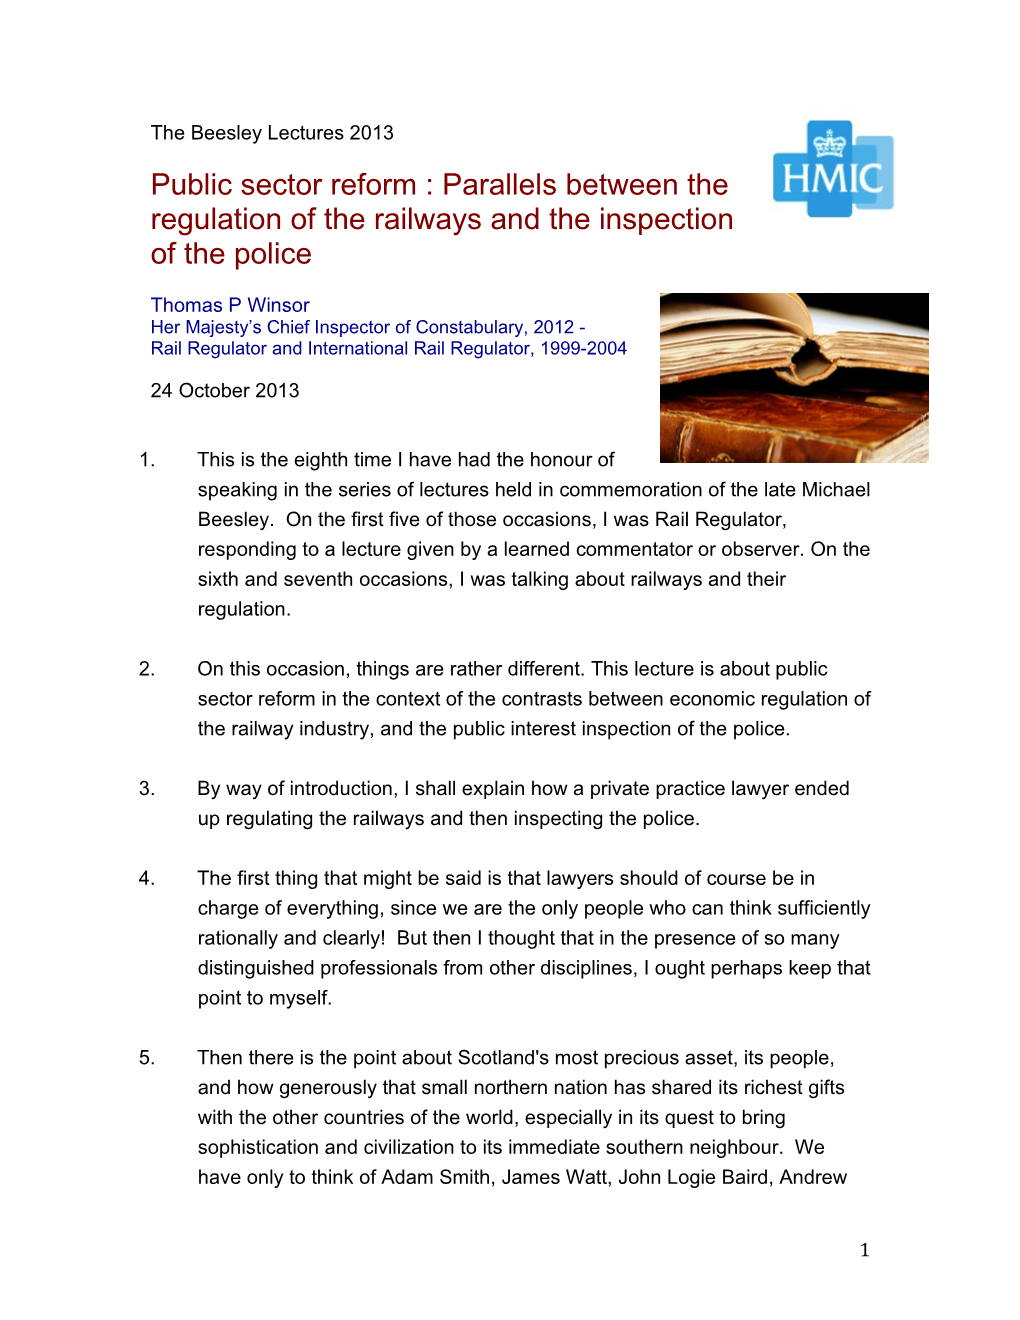 Public Sector Reform : Parallels Between the Regulation of the Railways and the Inspection of the Police